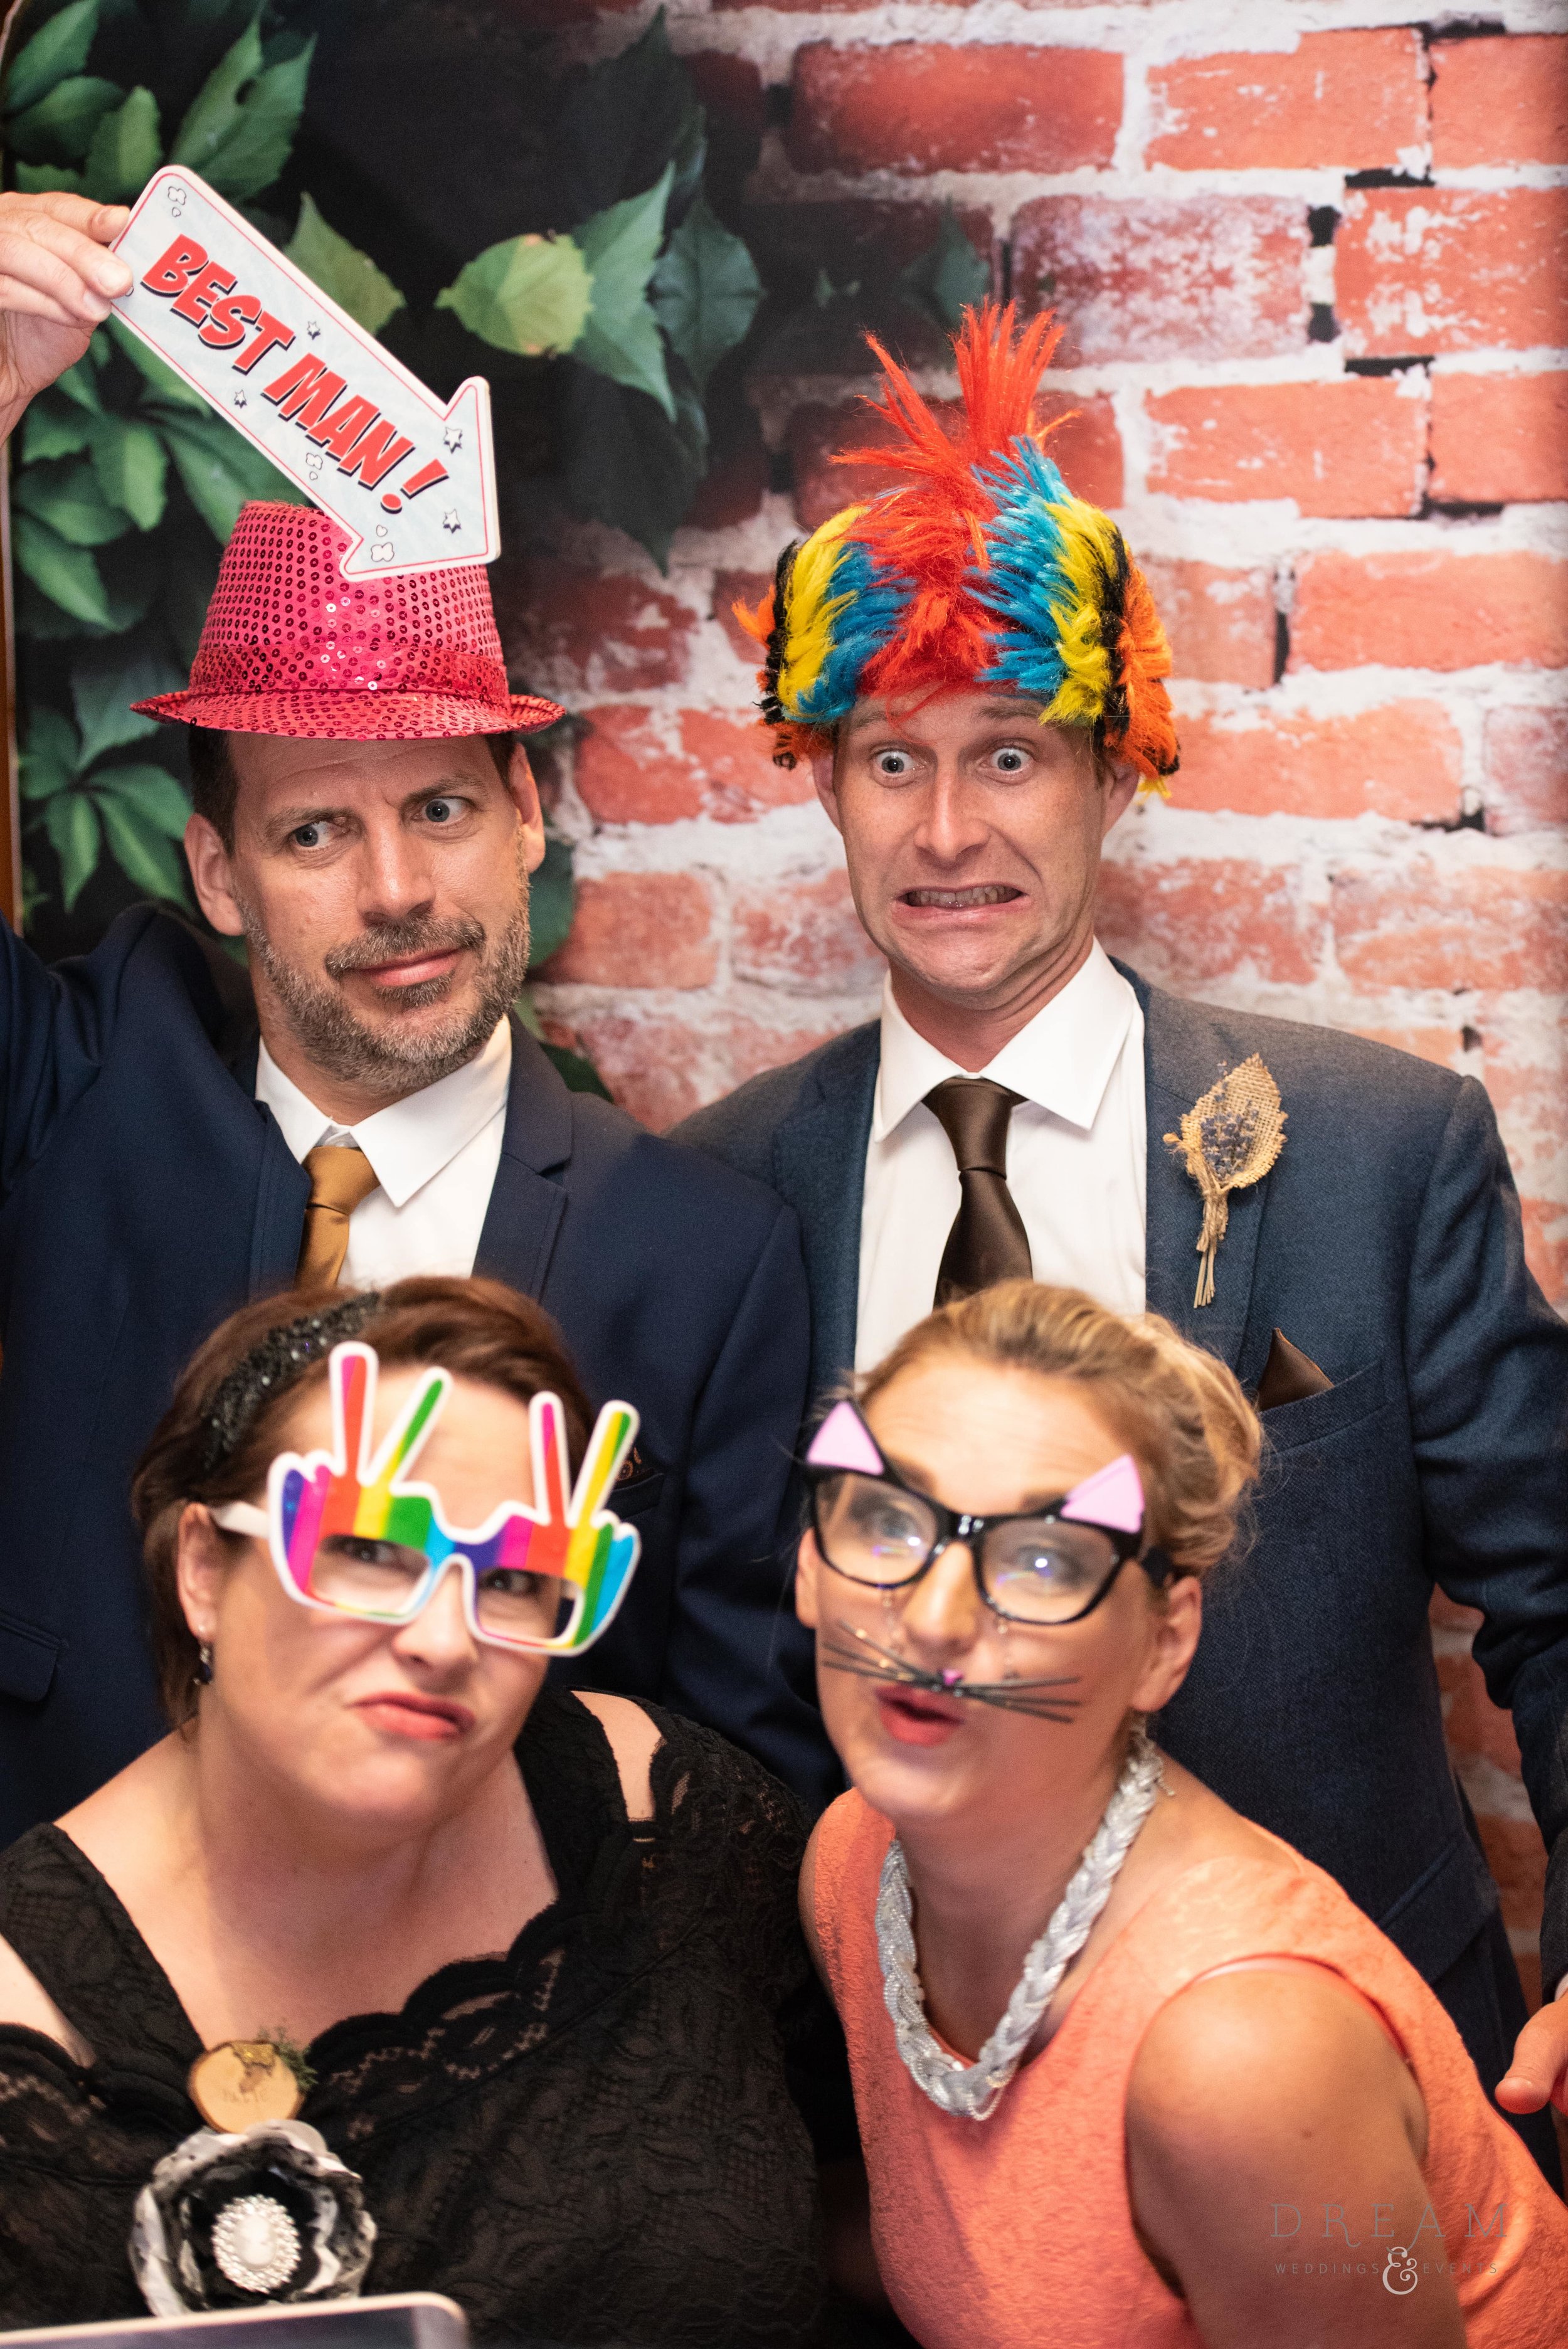 Corporate Event Magic Mirror Photo Booth Hire Nottingham, Derby, Leicester, East Midlands.